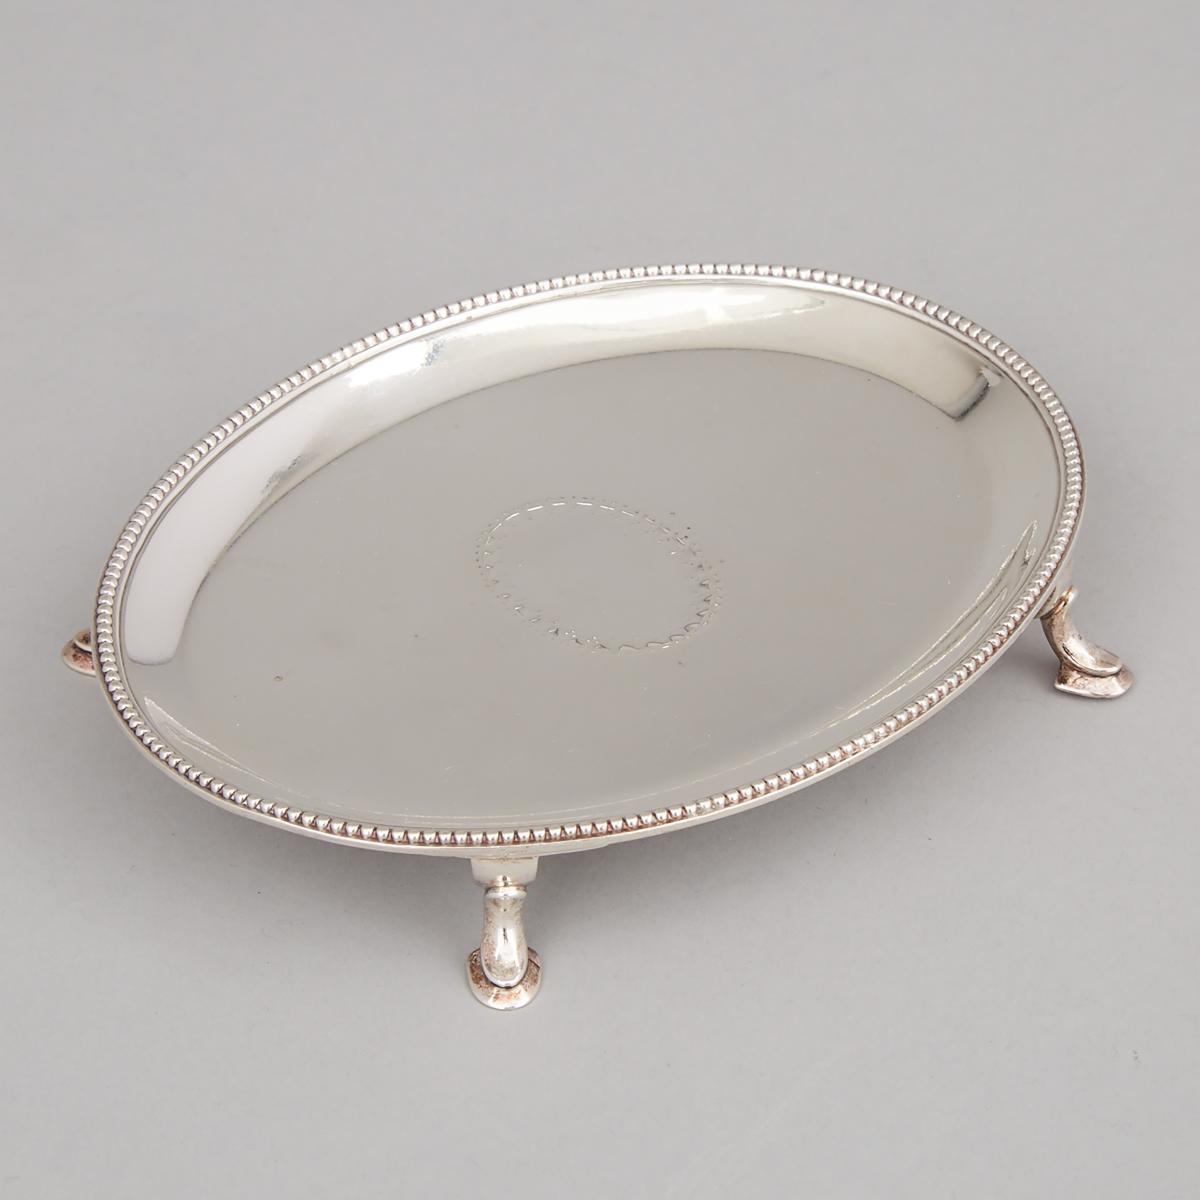 George III Silver Oval Teapot Stand, William Plummer, London, 1780, length 6.1 in — 15.5 cm